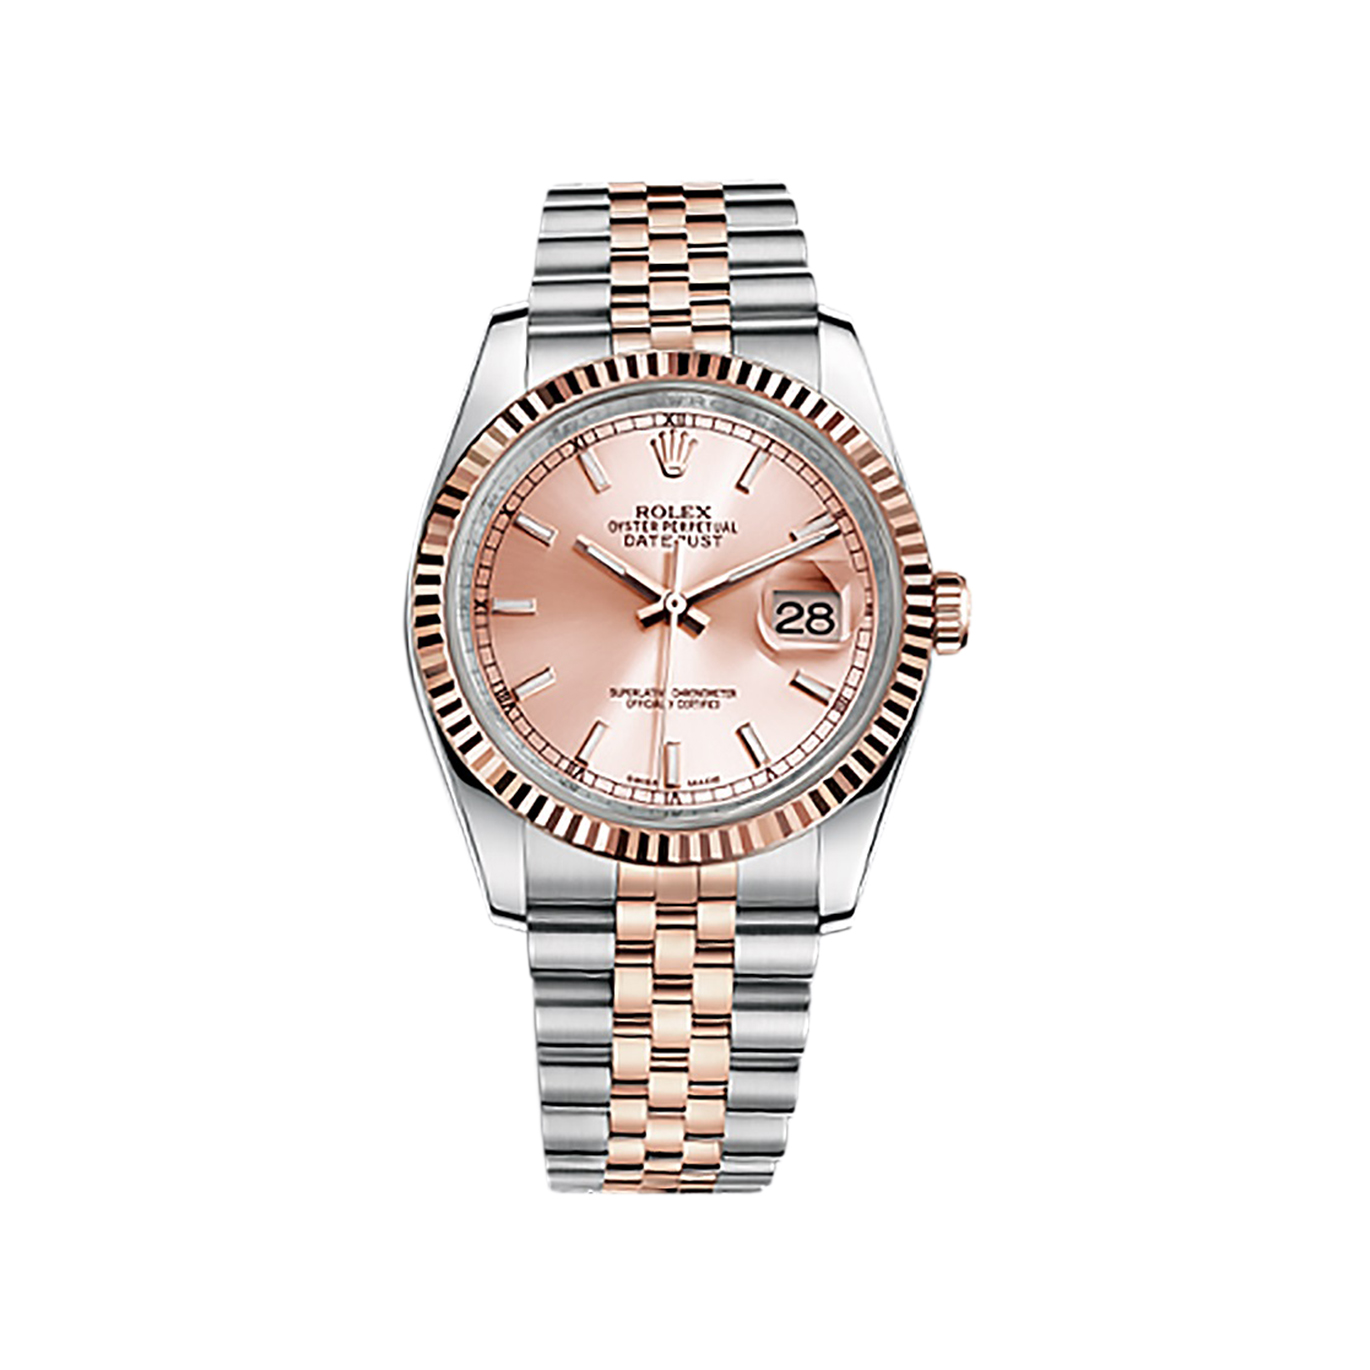 Datejust 36 116231 Rose Gold & Stainless Steel Watch (Pink)